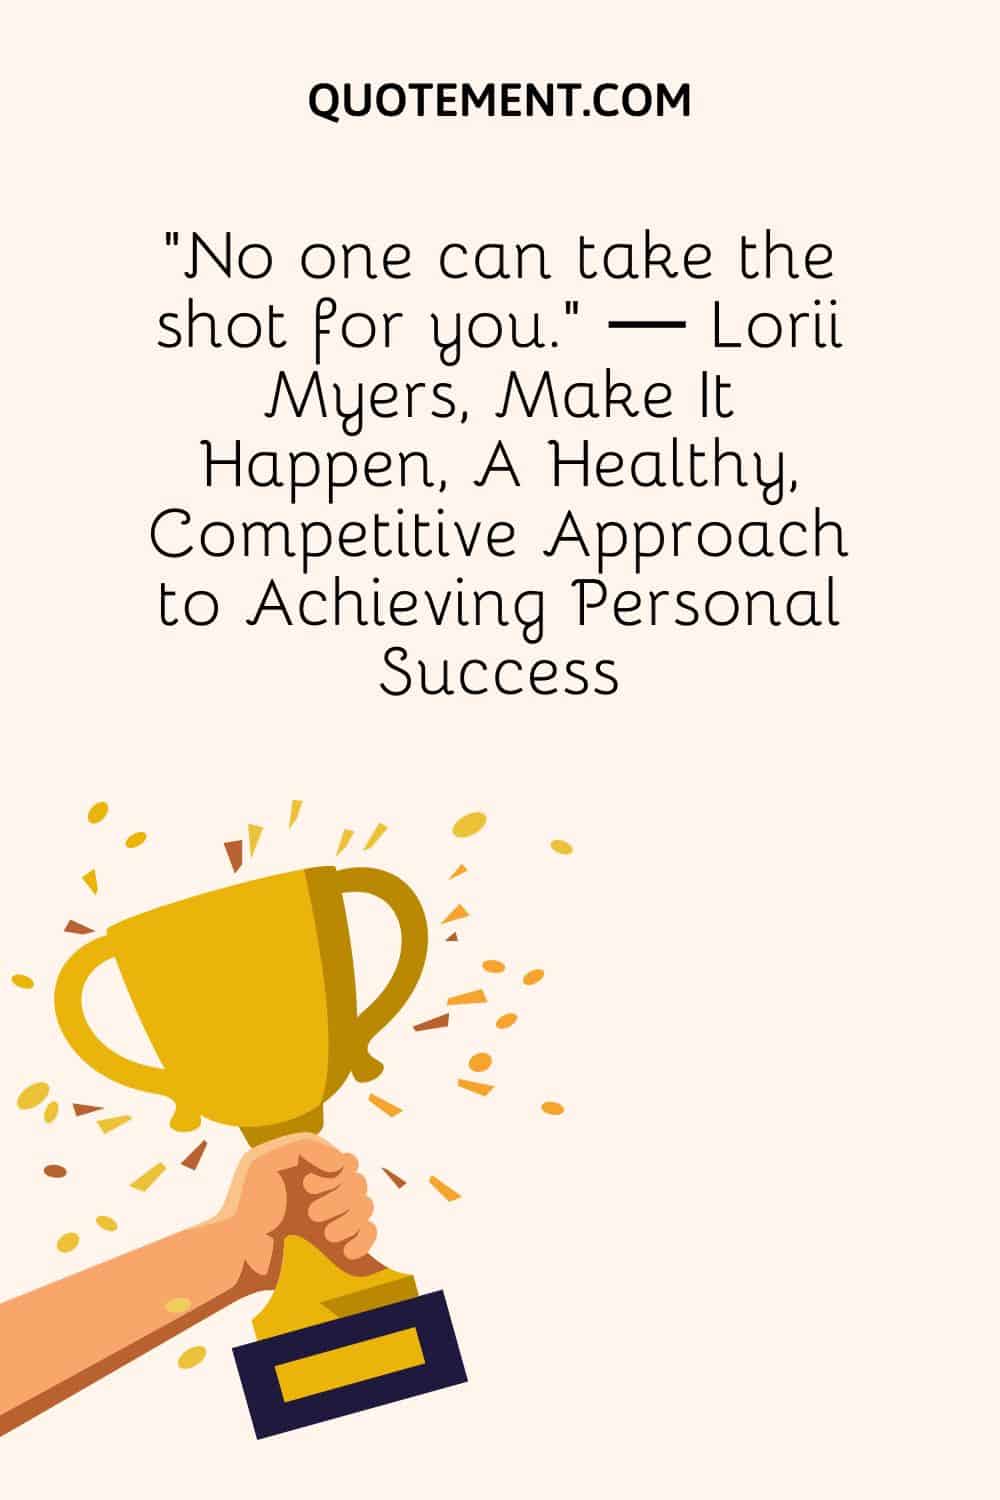 “No one can take the shot for you.” ― Lorii Myers, Make It Happen, A Healthy, Competitive Approach to Achieving Personal Success